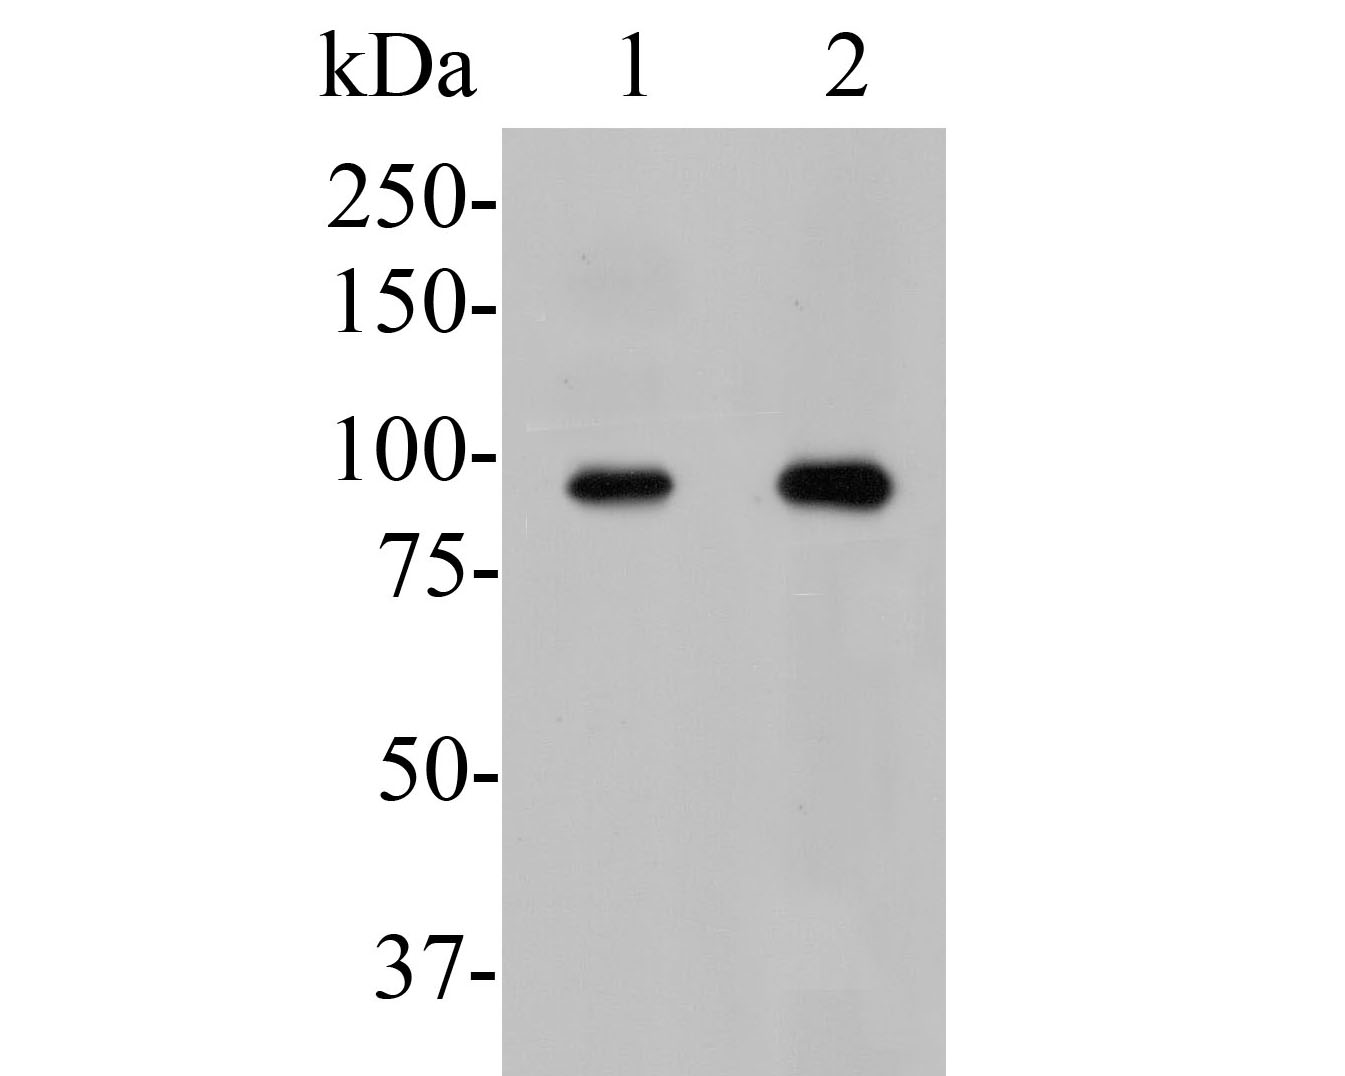 Western blot analysis of USP29 on different lysates. Proteins were transferred to a PVDF membrane and blocked with 5% BSA in PBS for 1 hour at room temperature. The primary antibody (ER1902-76, 1/500) was used in 5% BSA at room temperature for 2 hours. Goat Anti-Rabbit IgG - HRP Secondary Antibody (HA1001) at 1:5,000 dilution was used for 1 hour at room temperature.<br />
Positive control: <br />
Lane 1: THP-1 cell lysate<br />
Lane 2: Rat testis tissue lysate